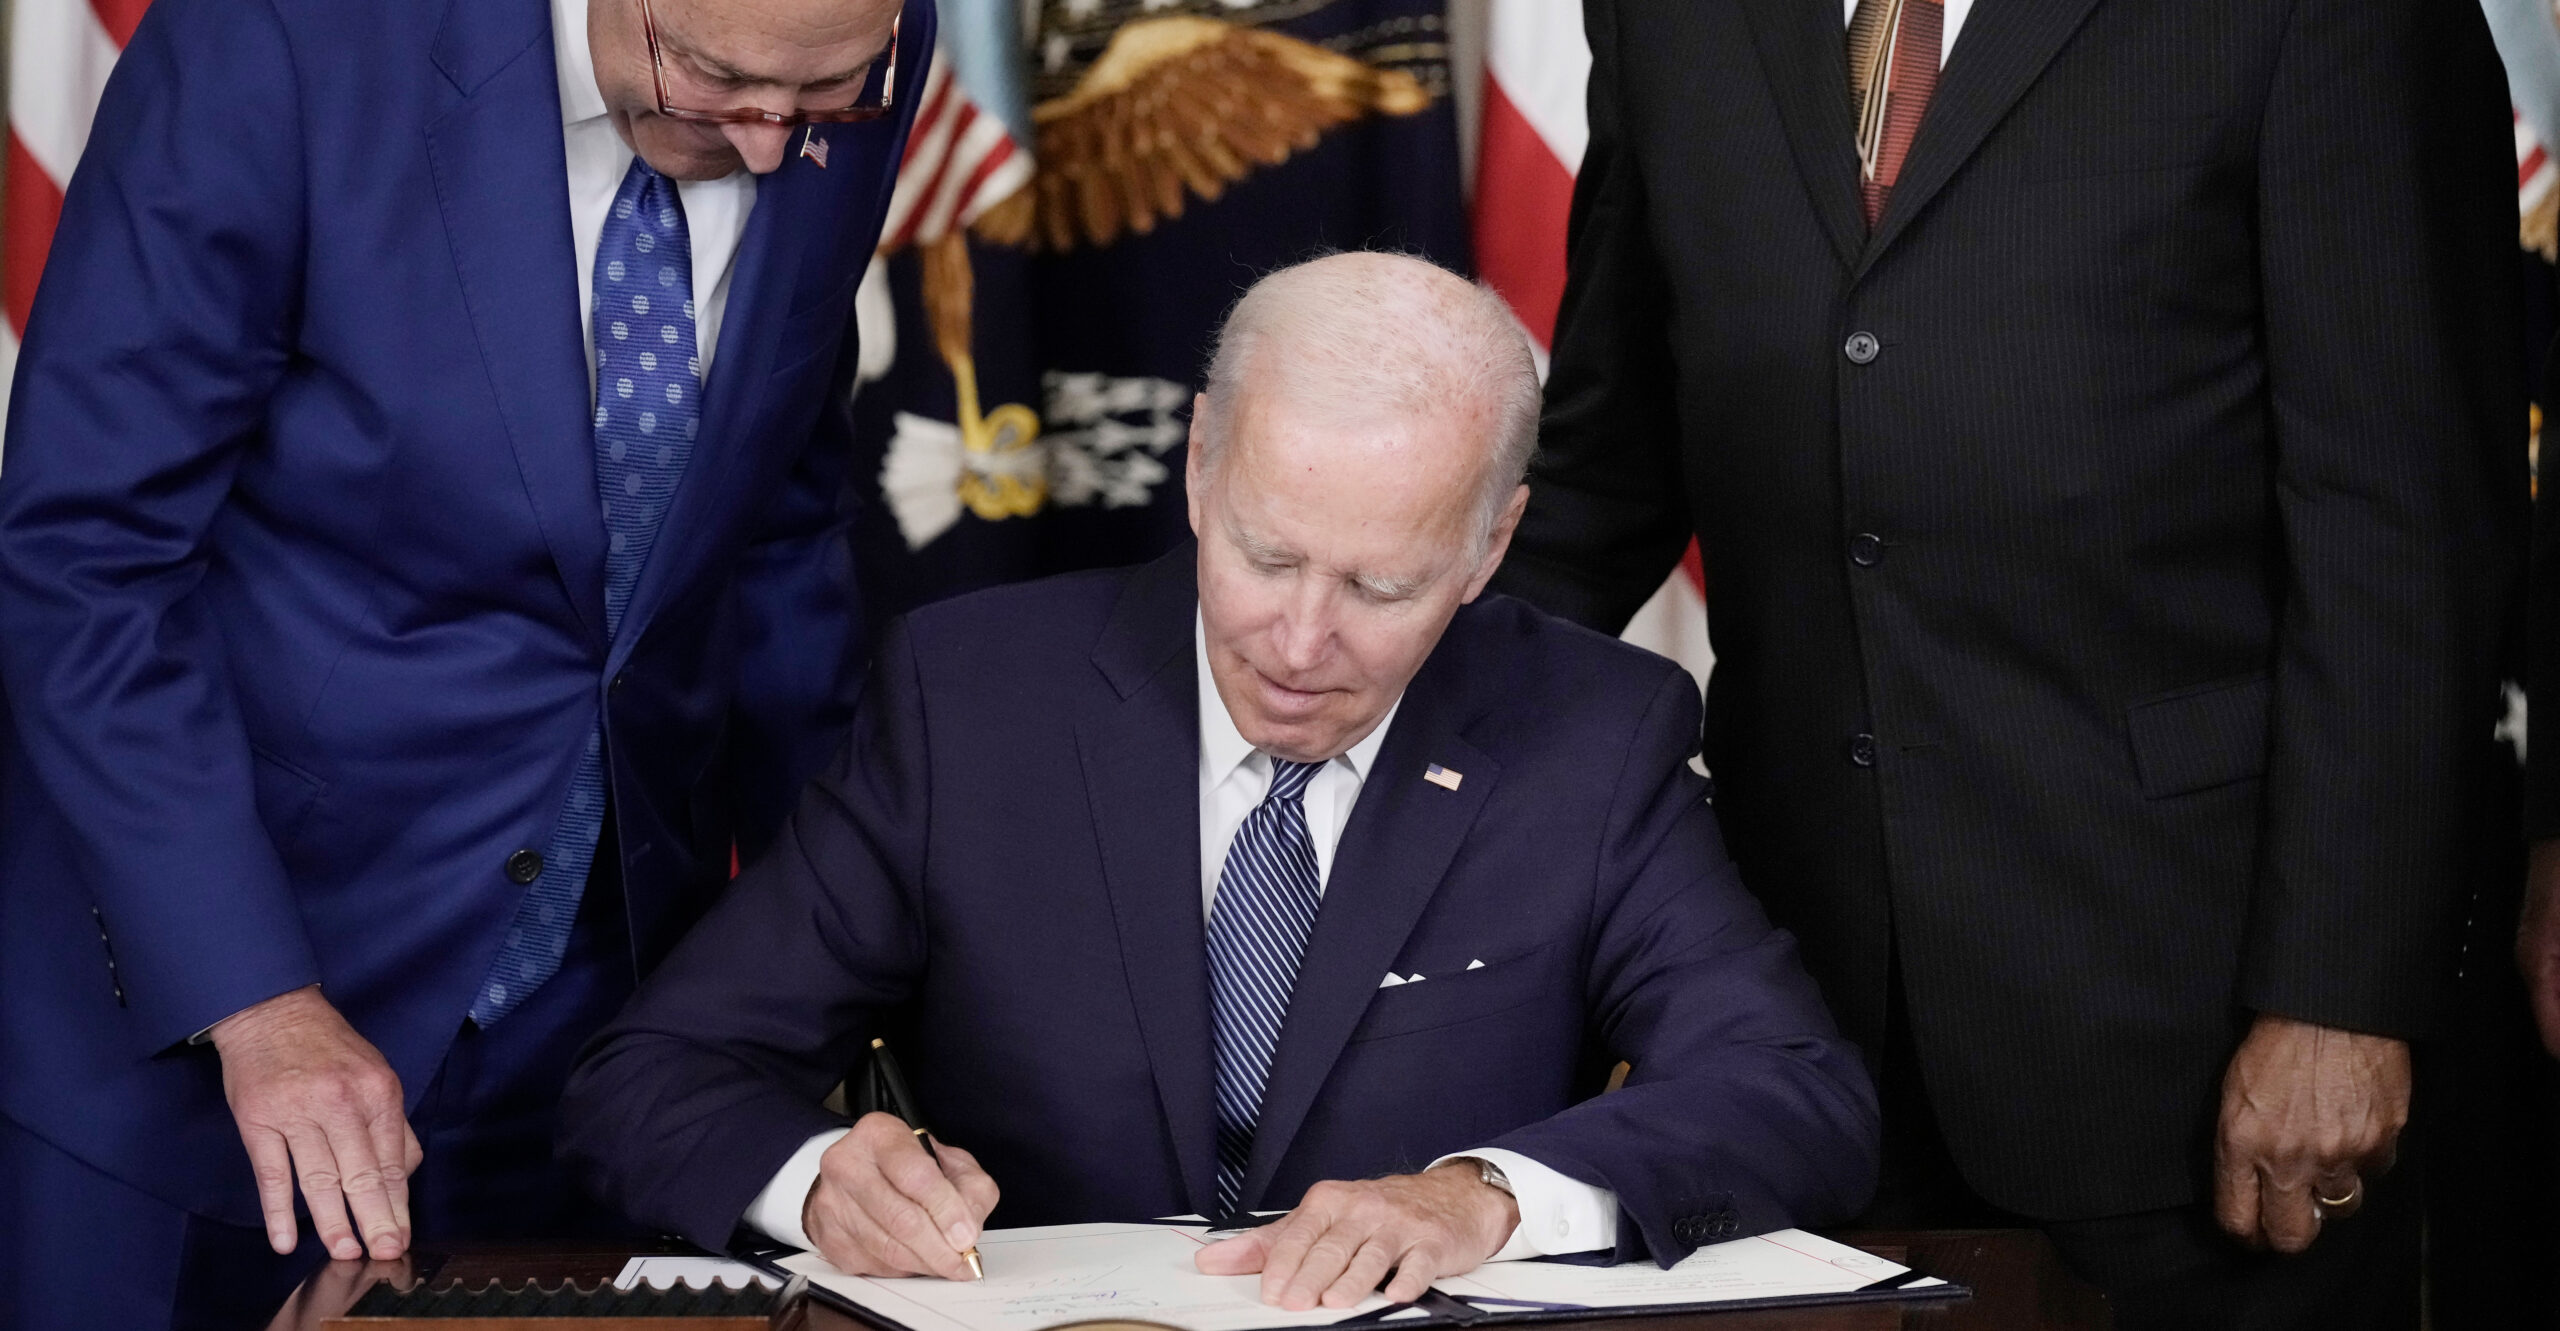 ICYMI: Biden Raised Taxes, but Tax Revenues Are Way Down This Year. Here Are 5 Reasons Why.